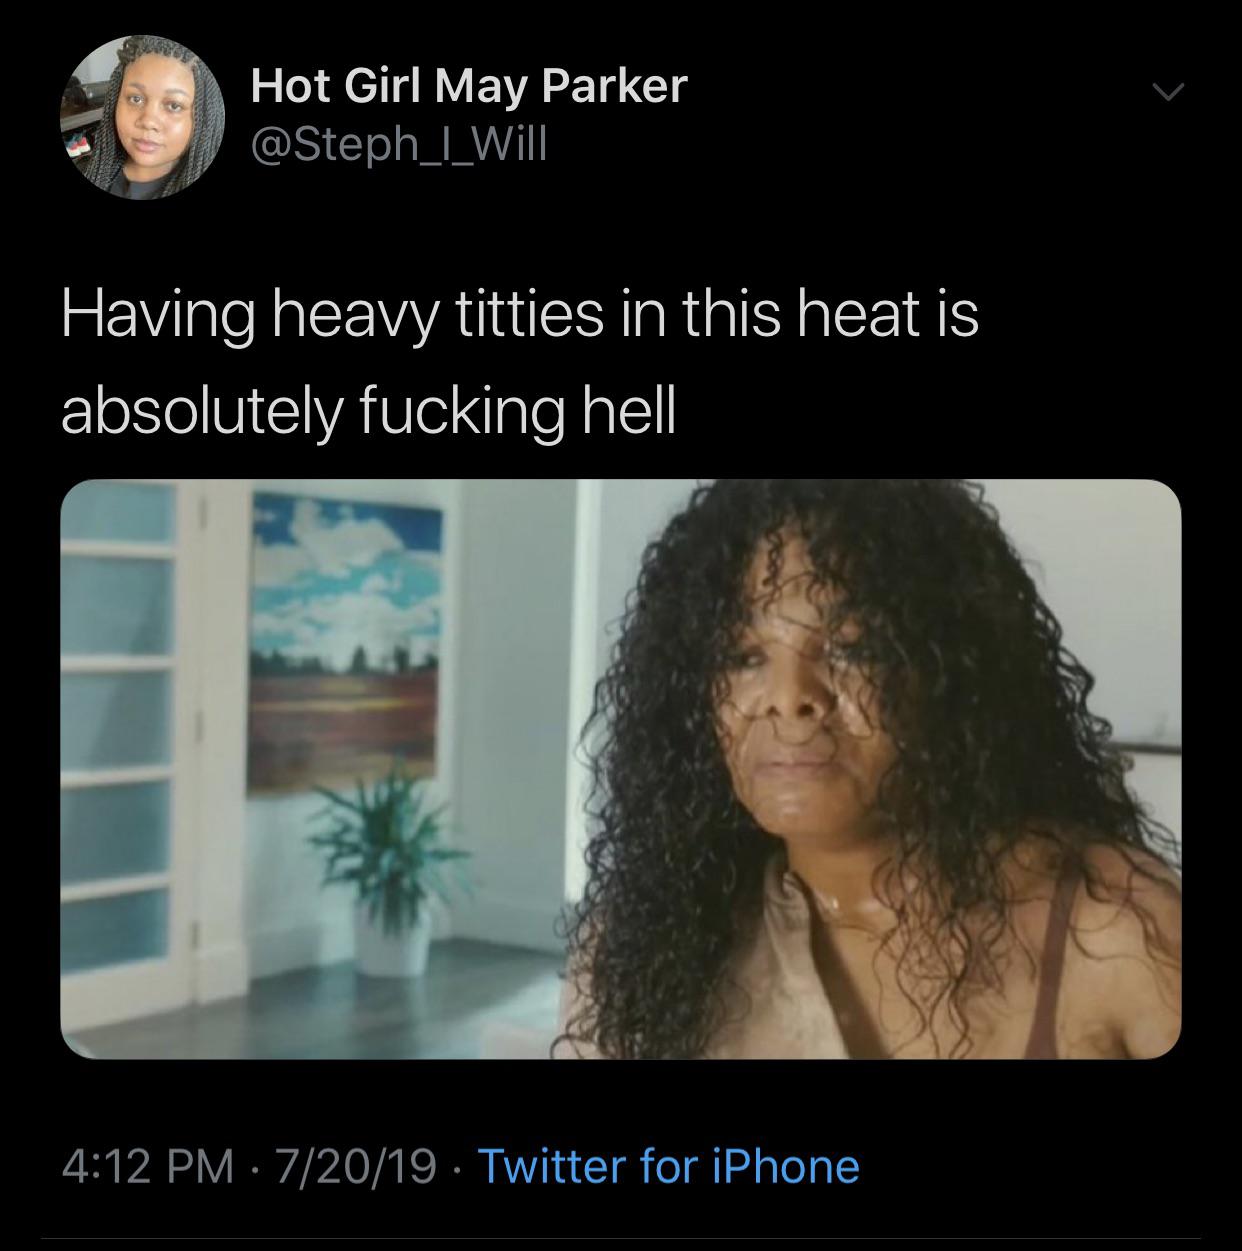 Hot Girl May Parker Having heavy titties in this heat is absolutely fucking hell